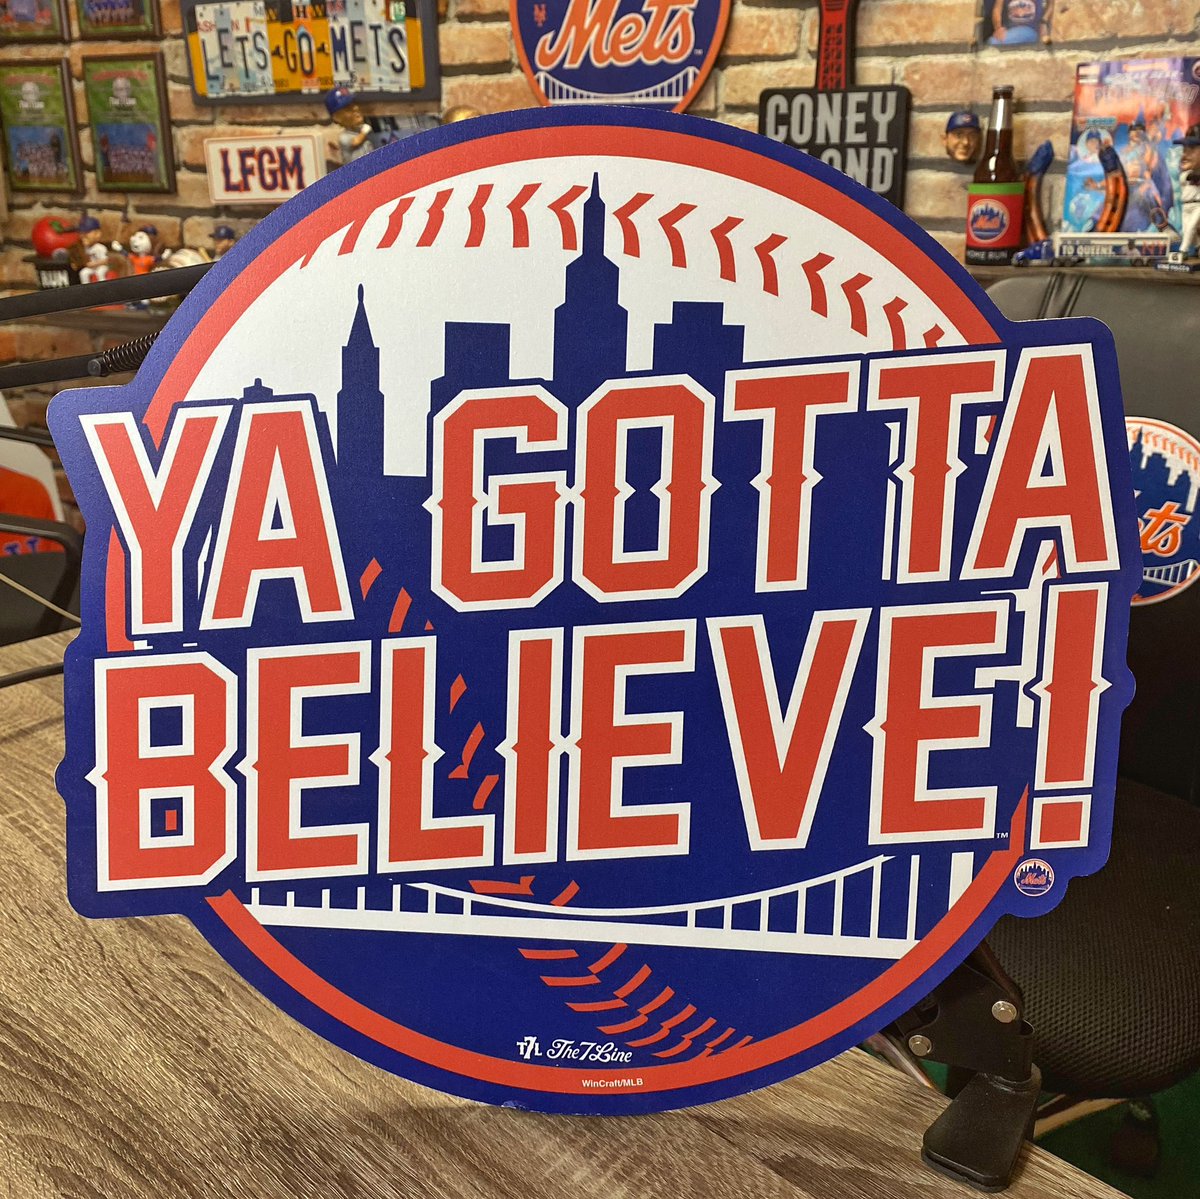 #MetsTwitter @nymets 
IMO, given today's developments, will mark a turning point into this season. The comments & actions of (my cousin) Jorge Lopez are regrettable & unforgivable! The team meeting that was had subsequently will determine what this team is made of!
LET'S GO METS!